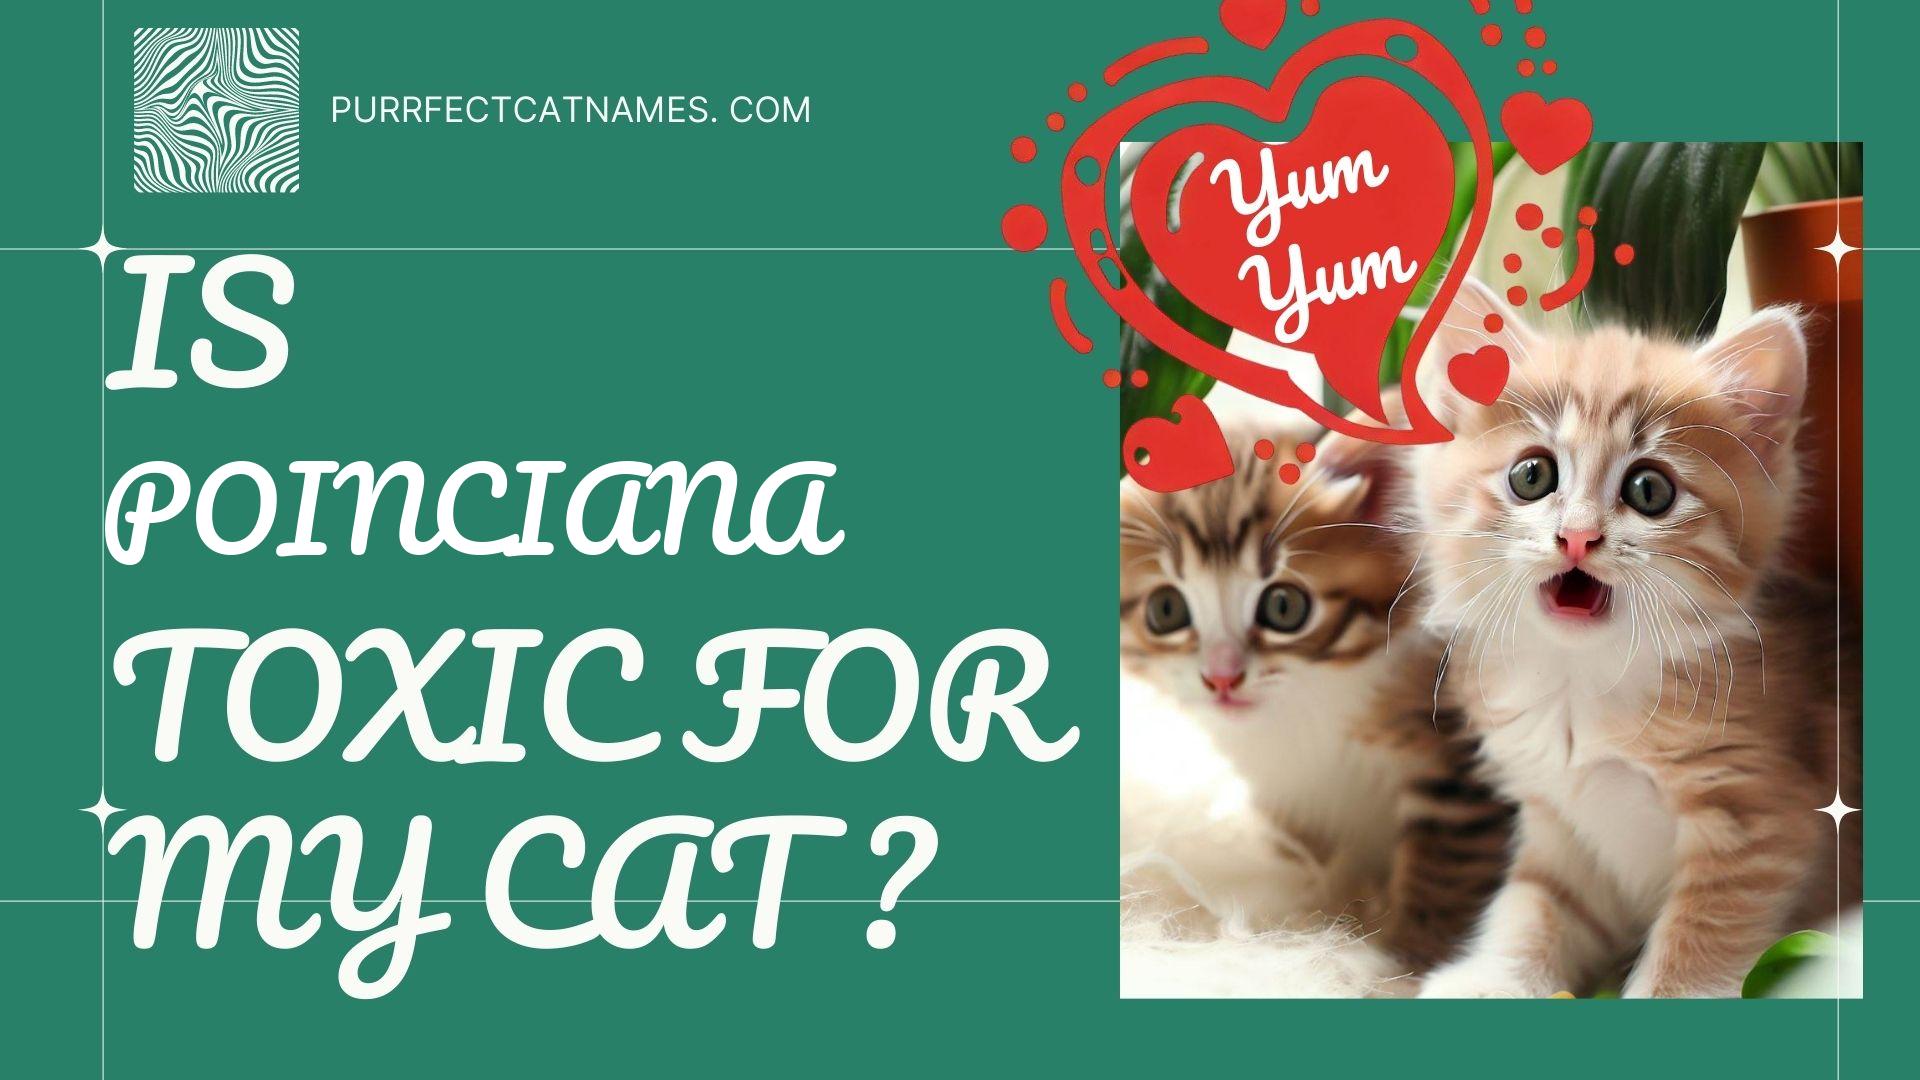 IsPoinciana plant toxic for your cat